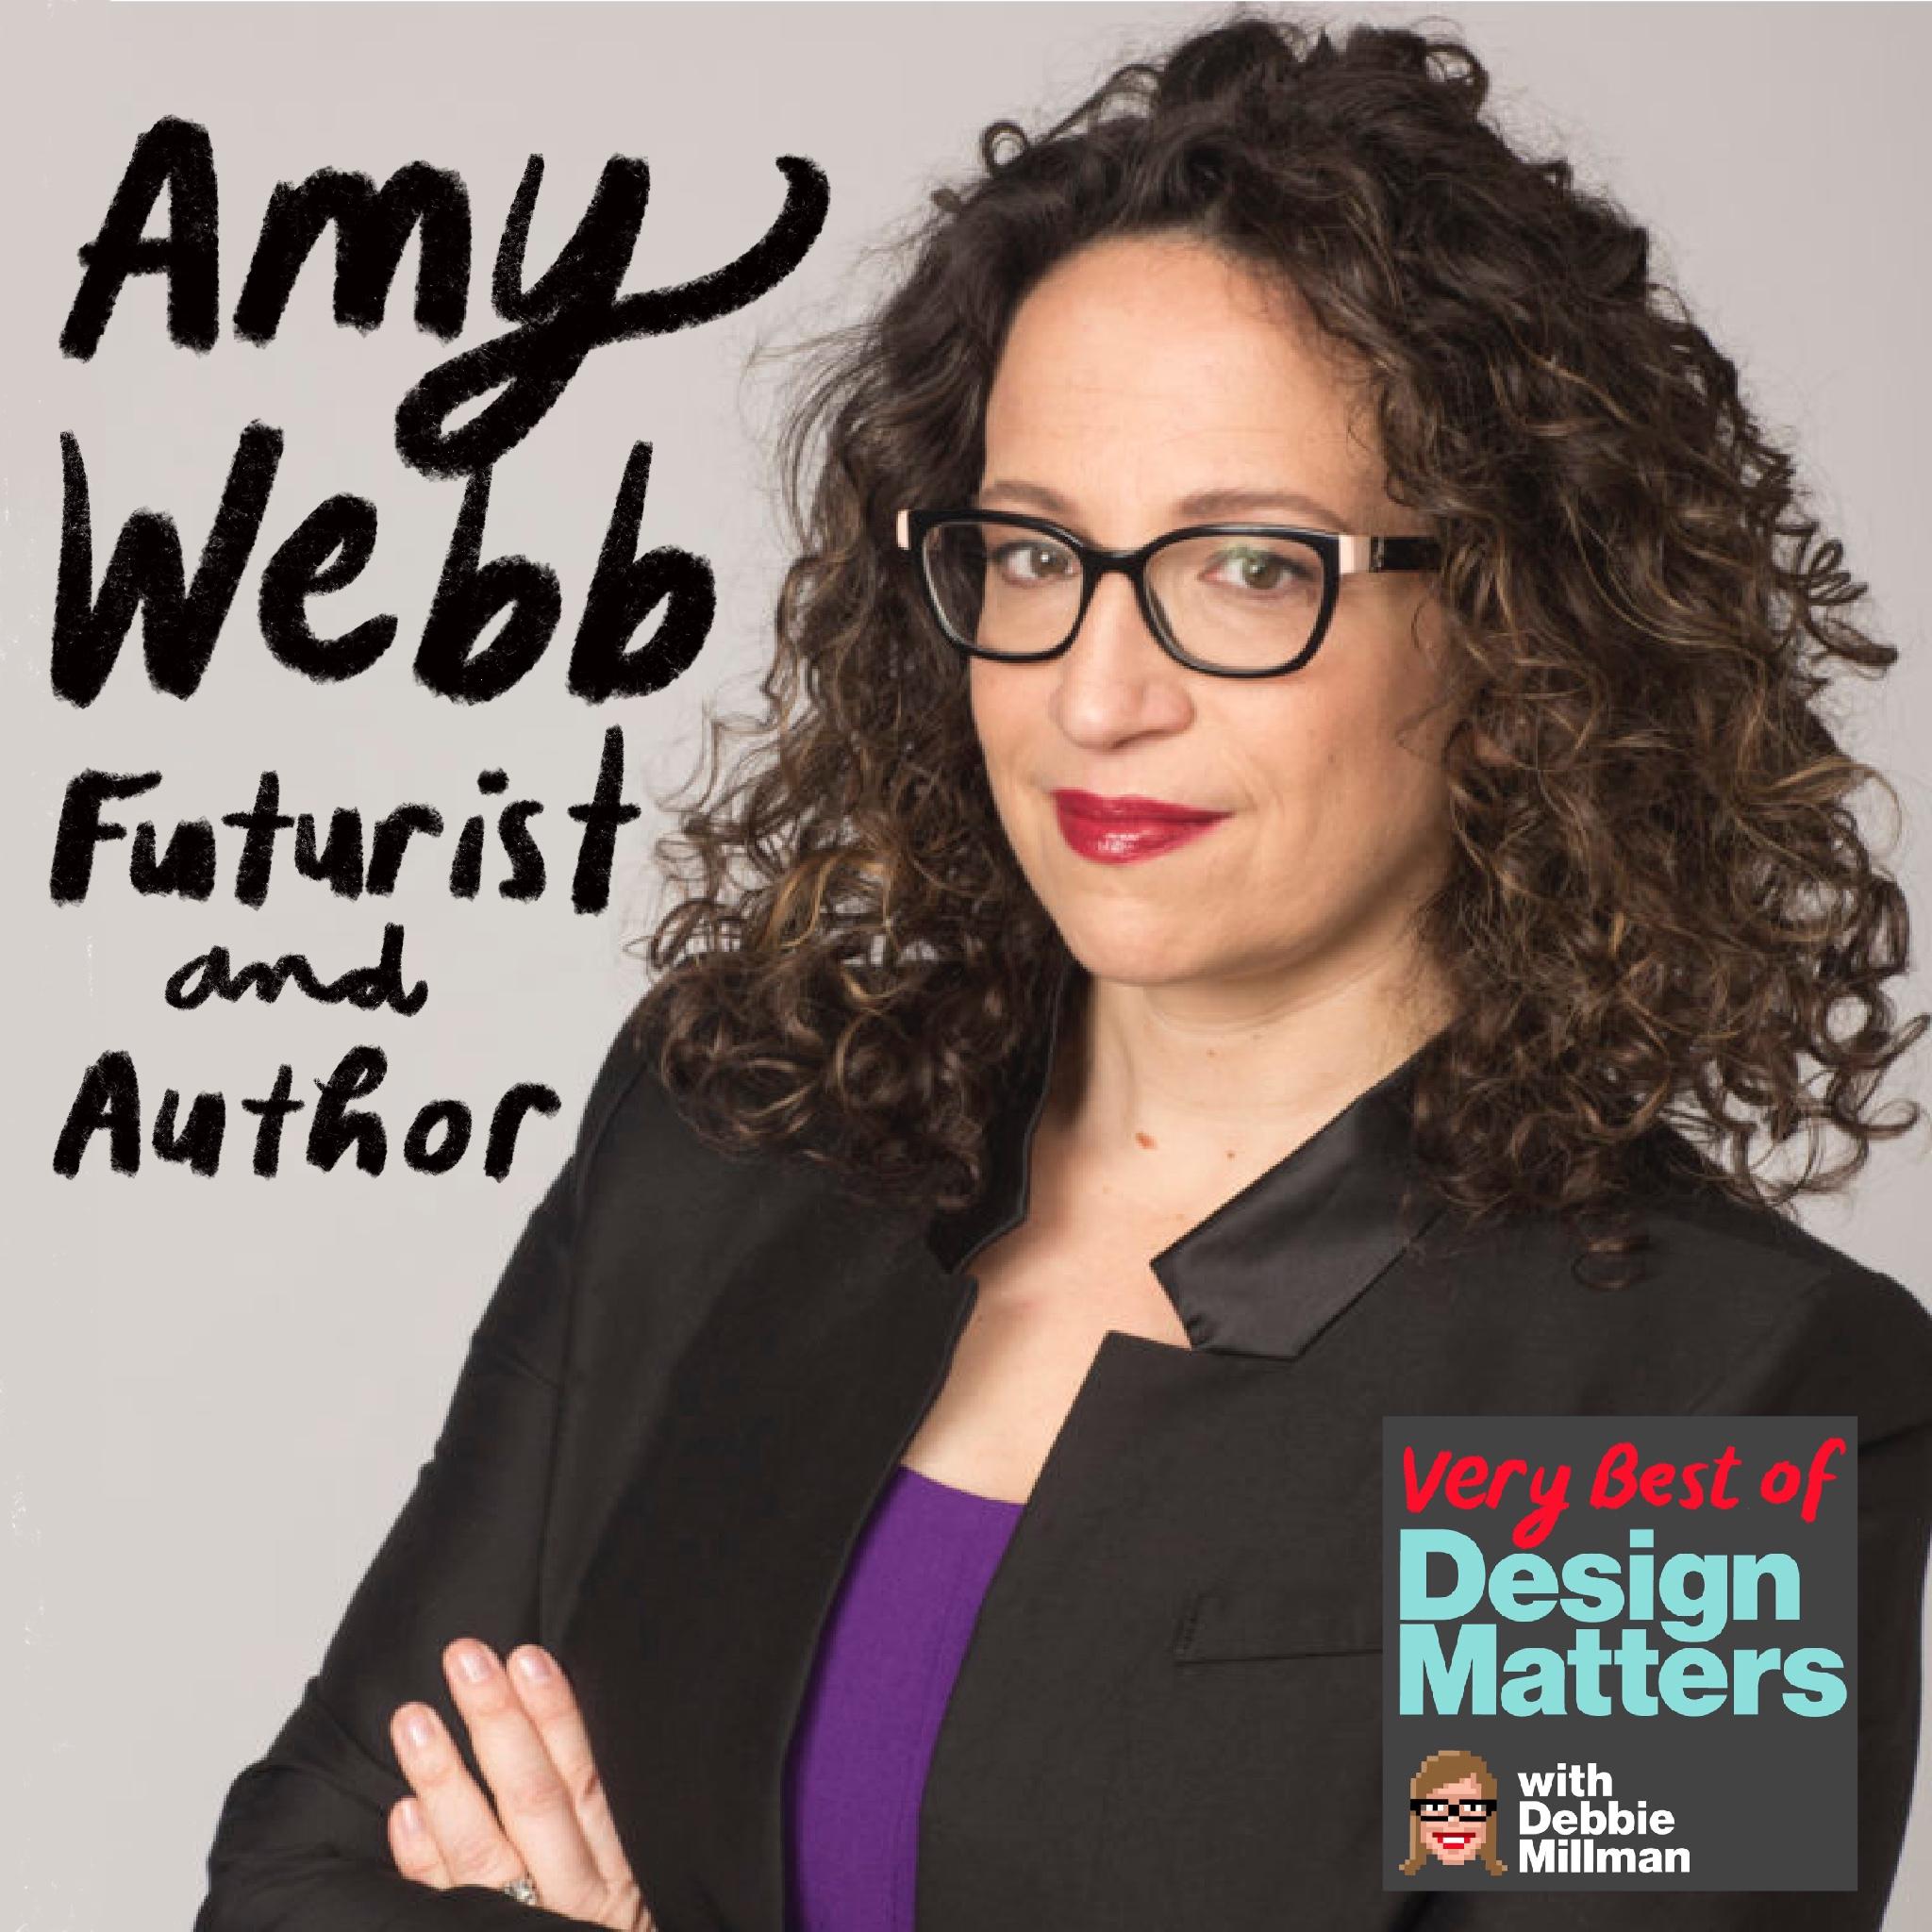 Thumbnail for "Best of Design Matters: Amy Webb".